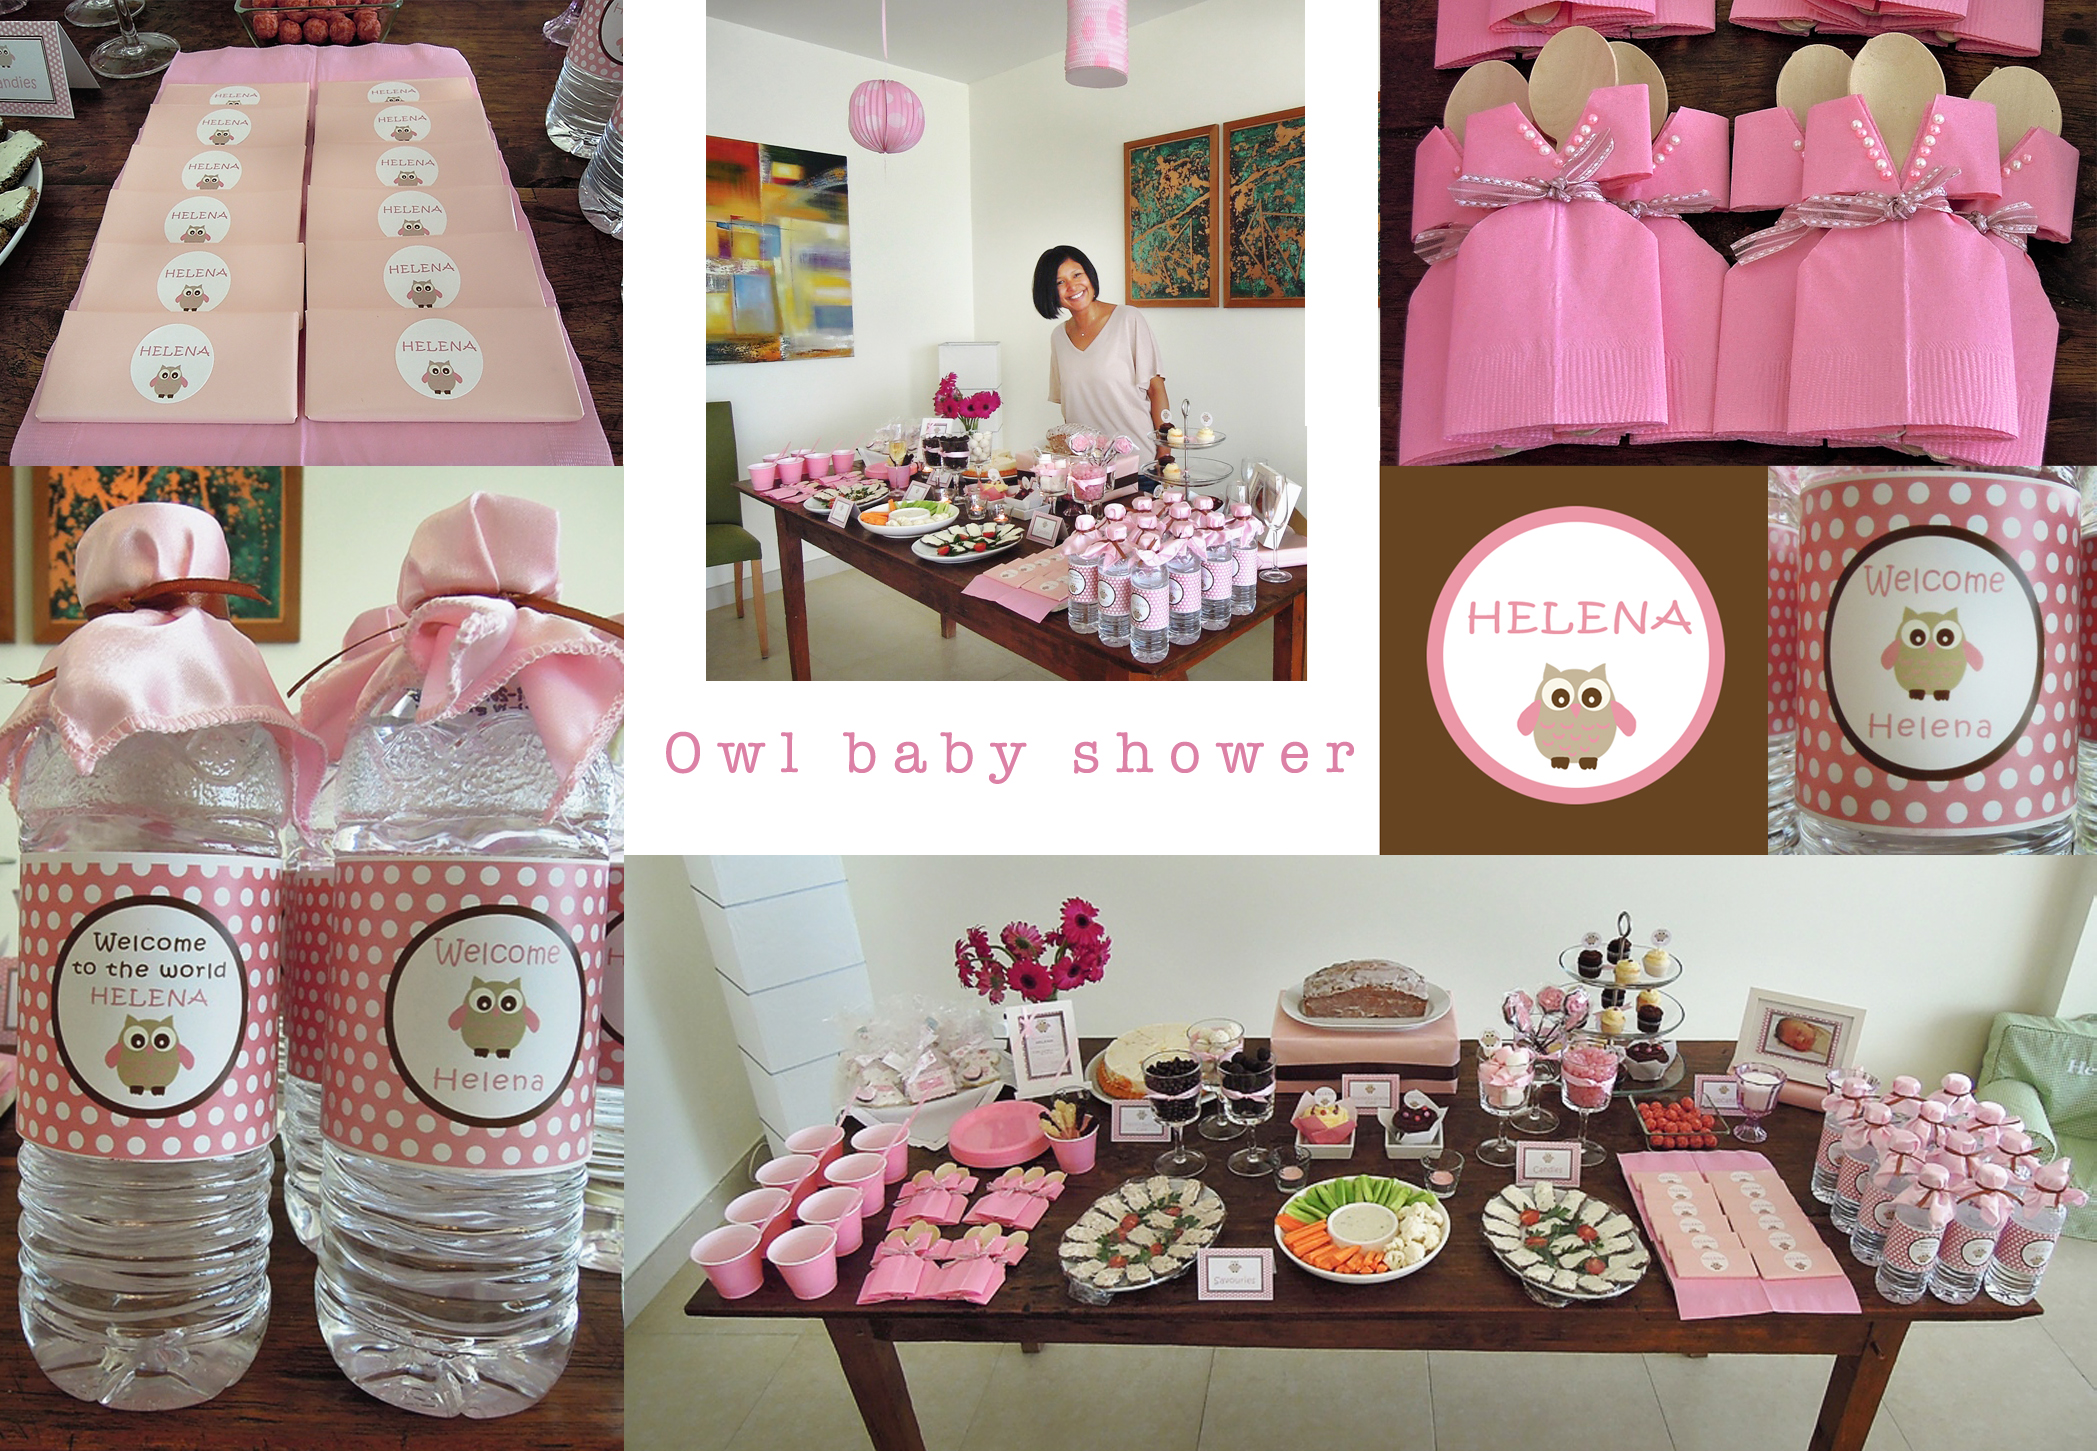 ... .com/2012/10/14/owl-themed-baby-shower-ideas-baby-shower-pictures